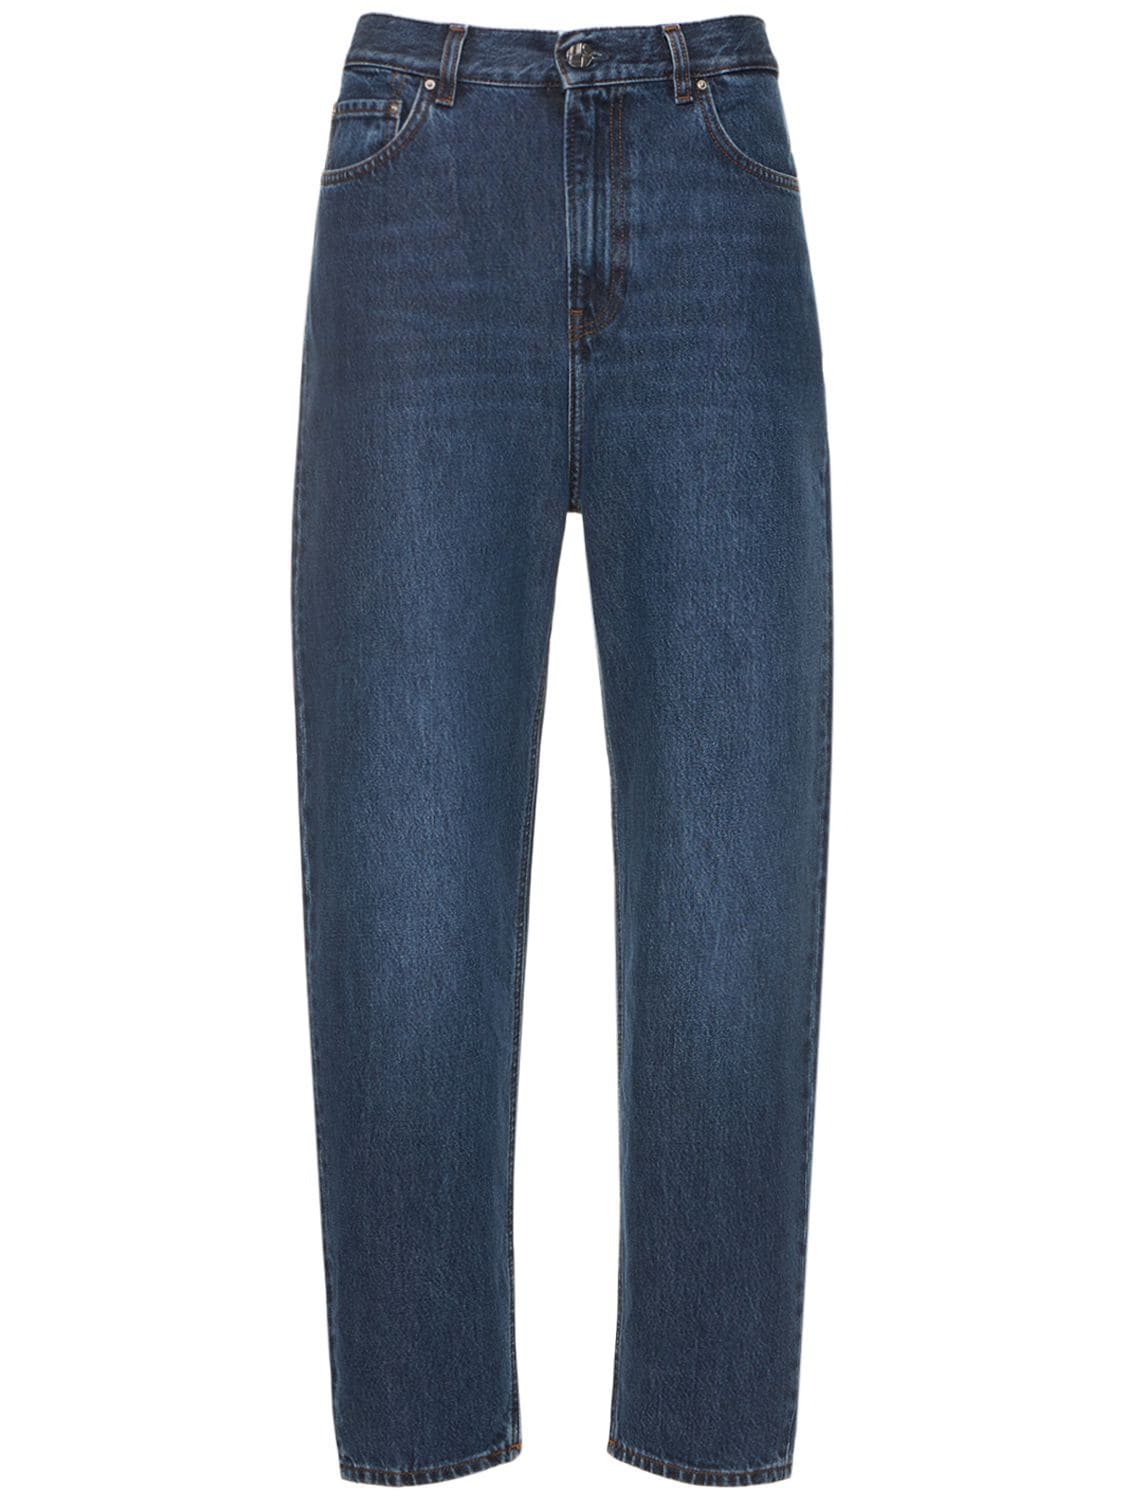 Image of High Rise Tapered Organic Cotton Jeans